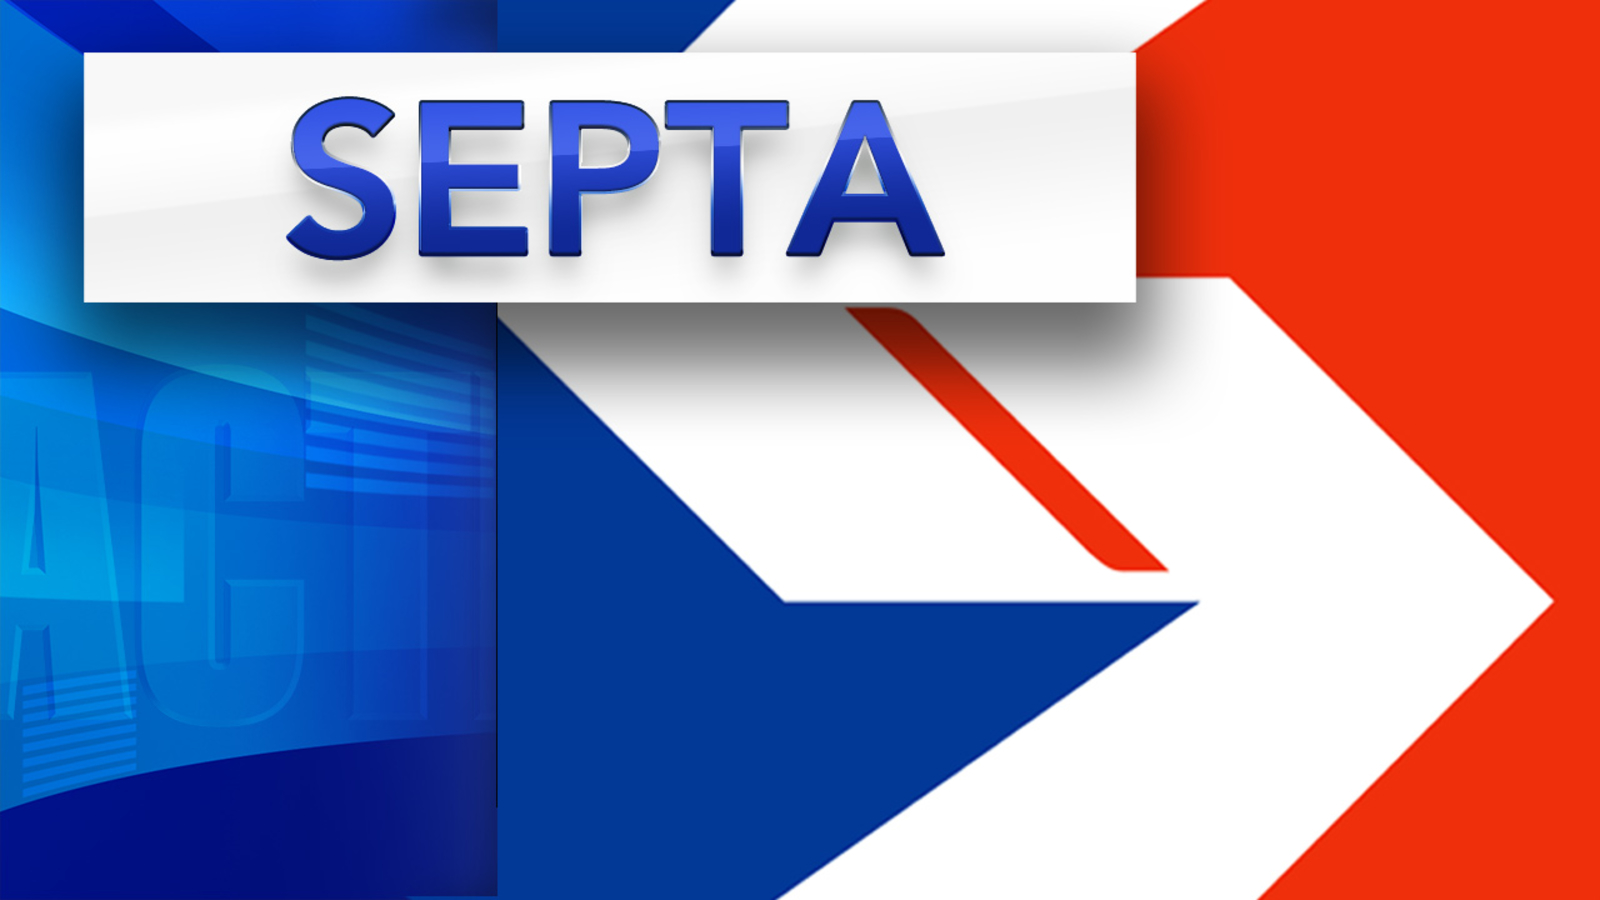 3 SEPTA employees die from COVID-19 -TV